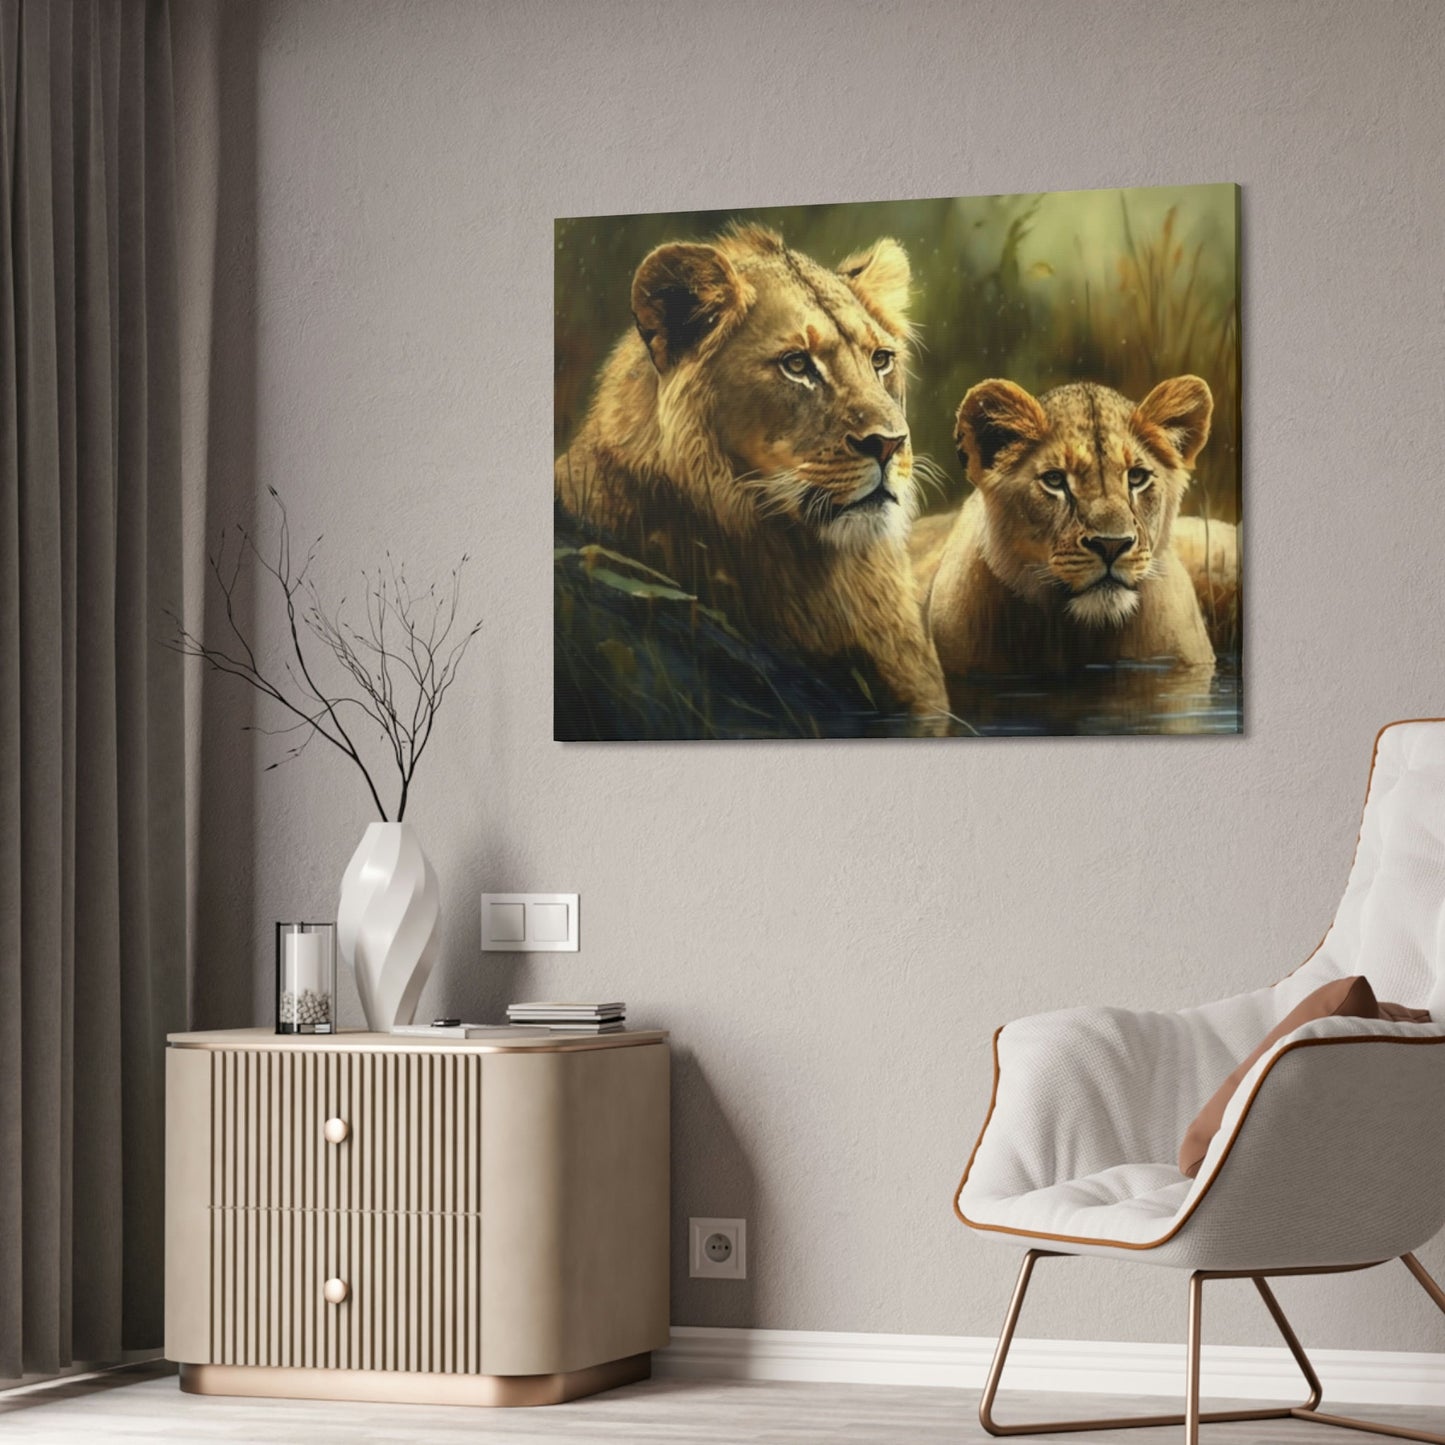 Radiance of the Sun: A Painting with Lions